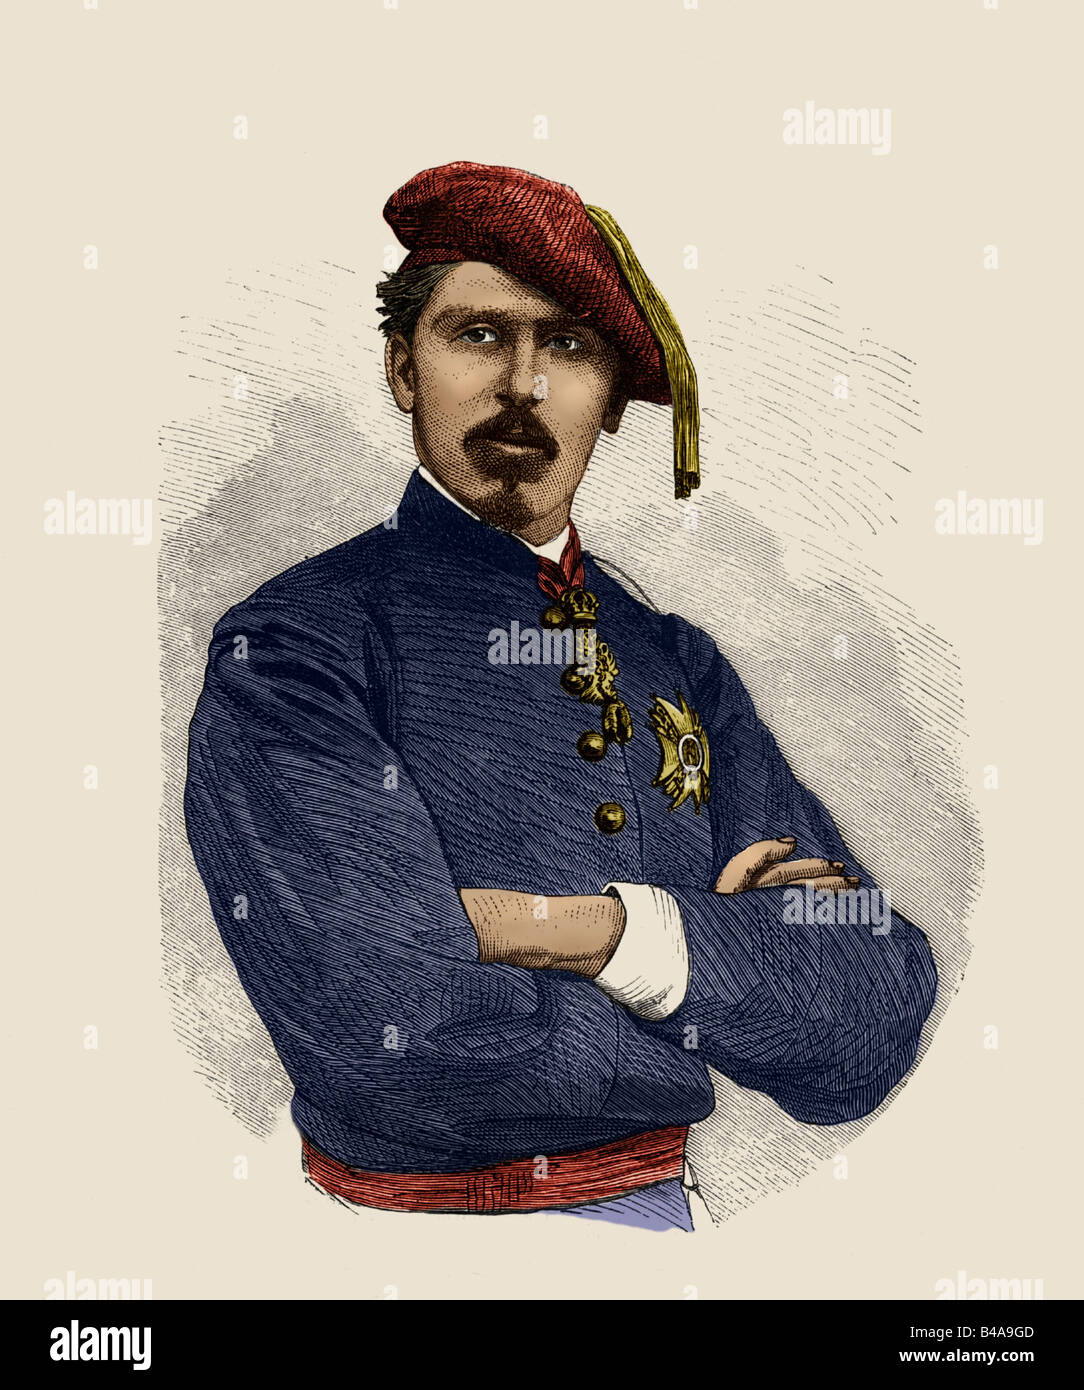 Carlos Maria de los Dolores, 30.3.1848 - 18.7.1909, clairmant to the Spanish Throne 13.1.1861 - 18.7.1909, portrait, wood engraving, circa 1875, later coloured, , Stock Photo